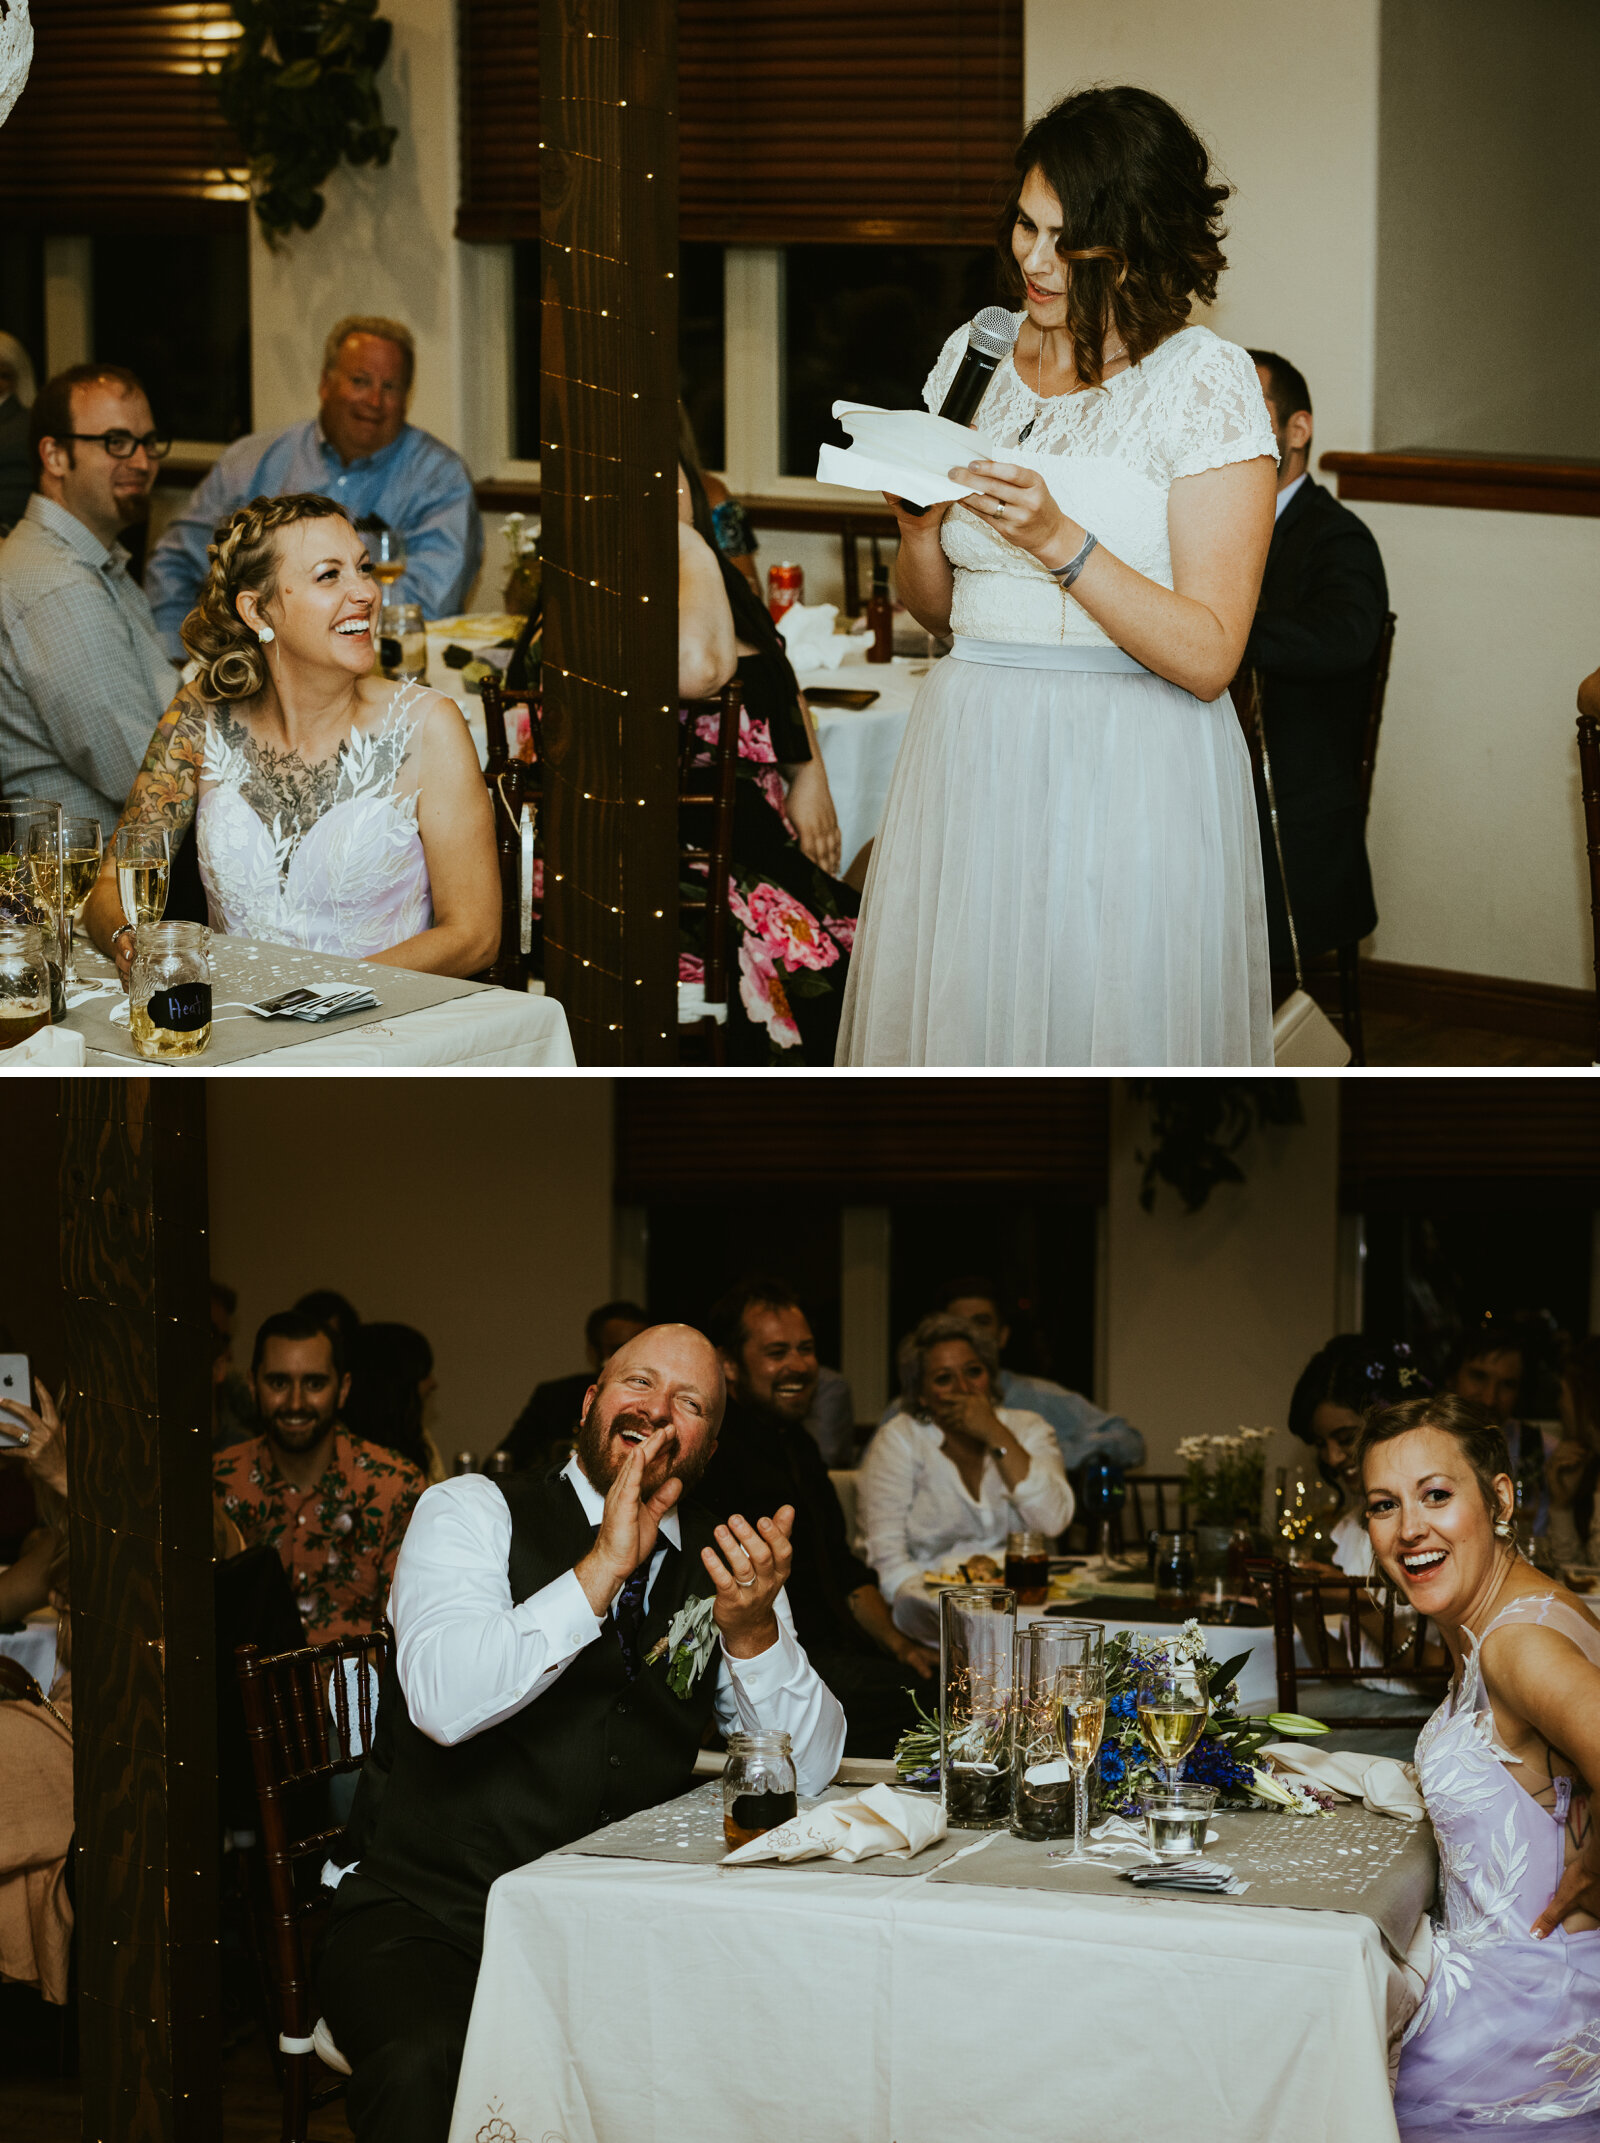 toasts during a wedding reception.jpg